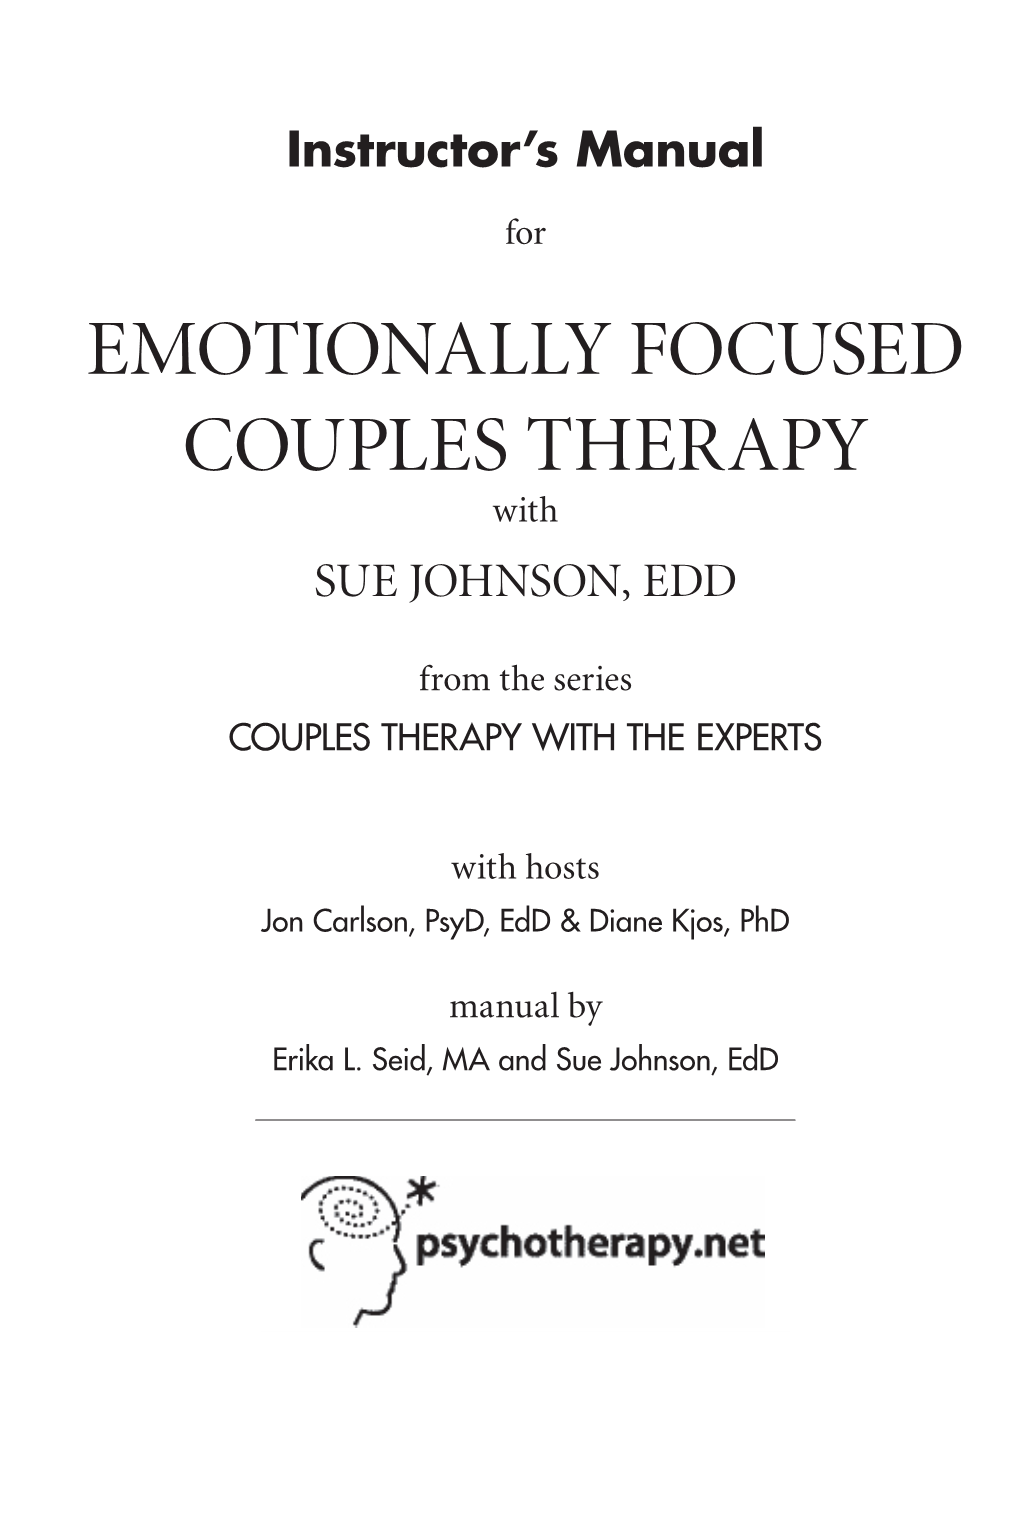 EMOTIONALLY FOCUSED COUPLES THERAPY with Sue Johnson, Edd